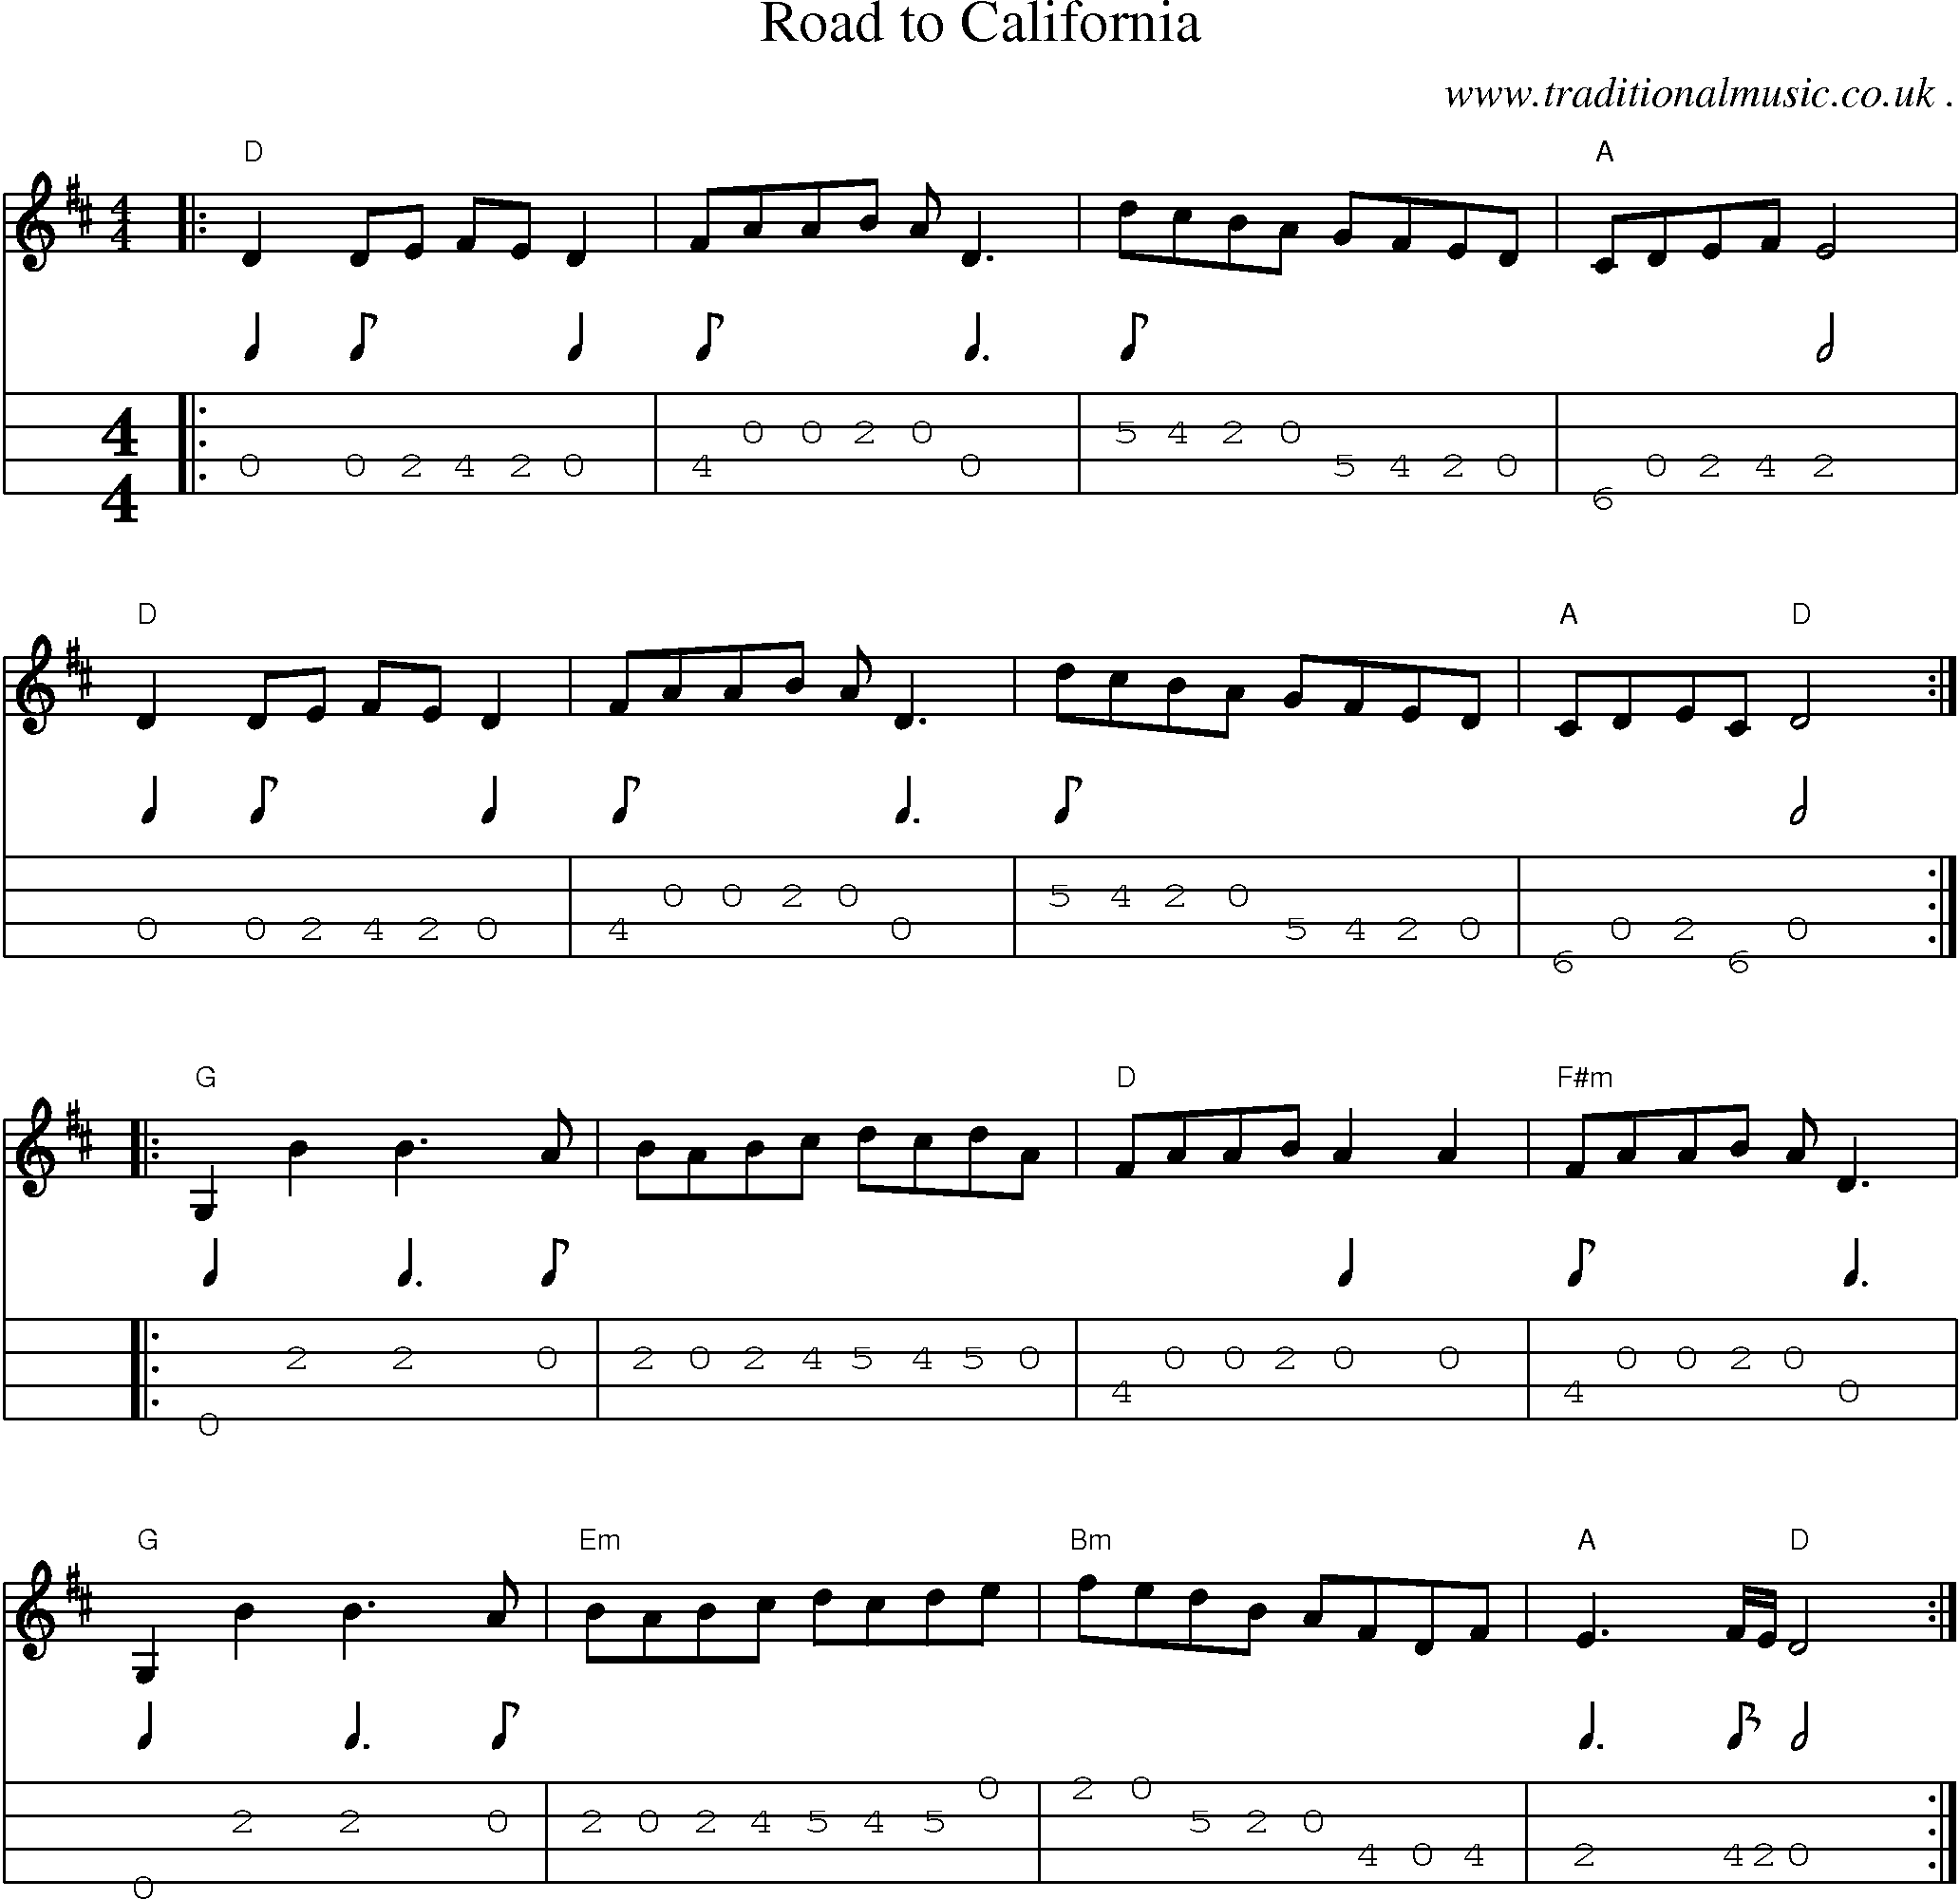 Music Score and Guitar Tabs for Road To California